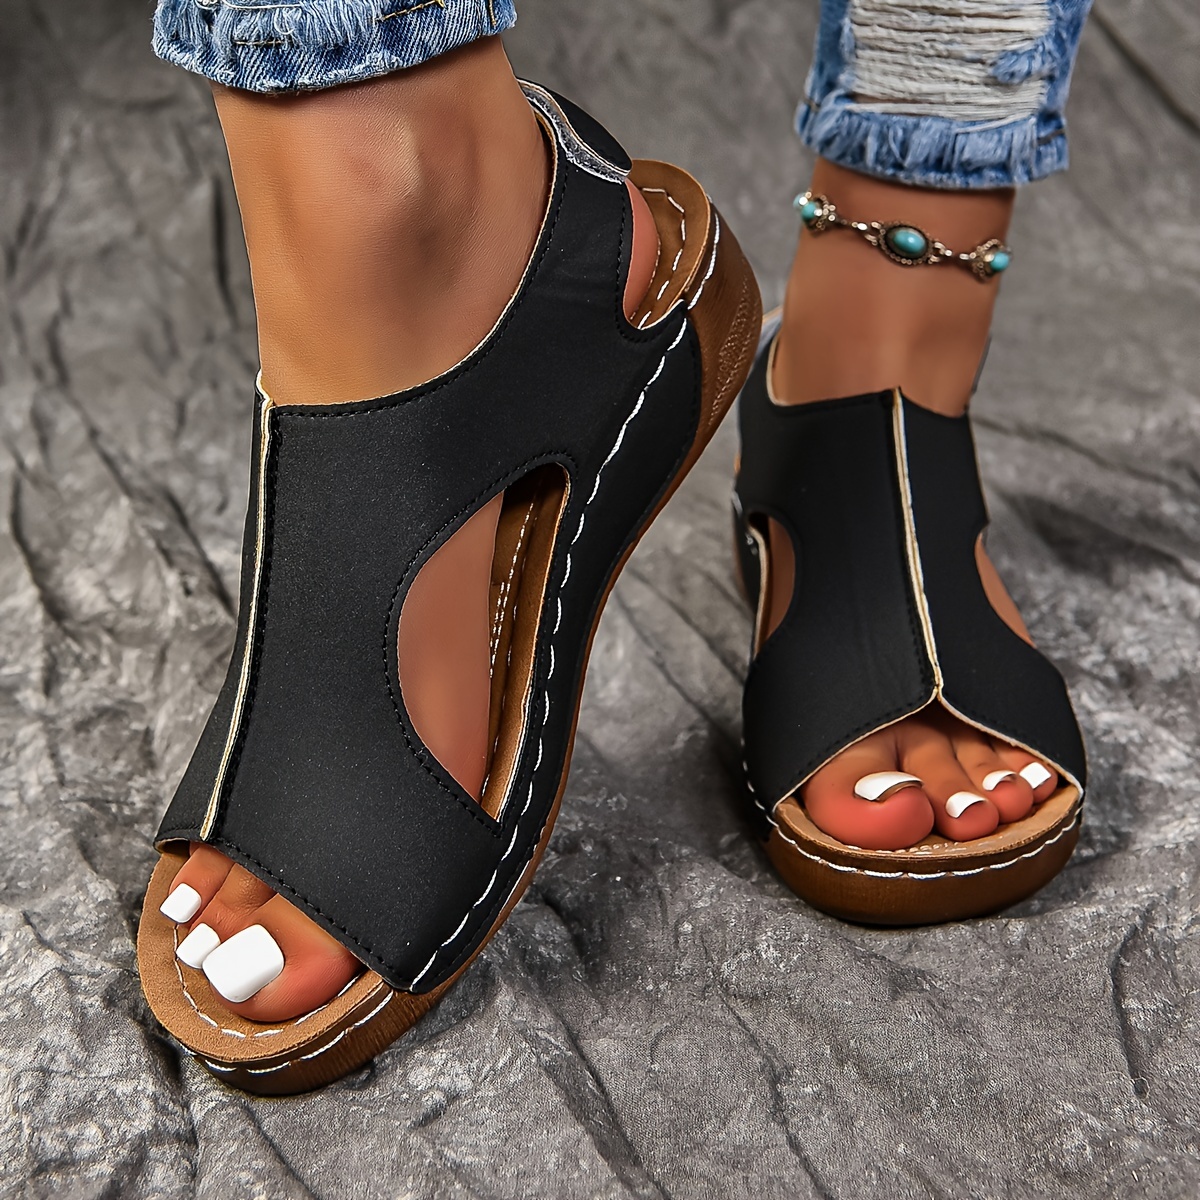 women s solid color wedge heeled sandals casual open toe details 12